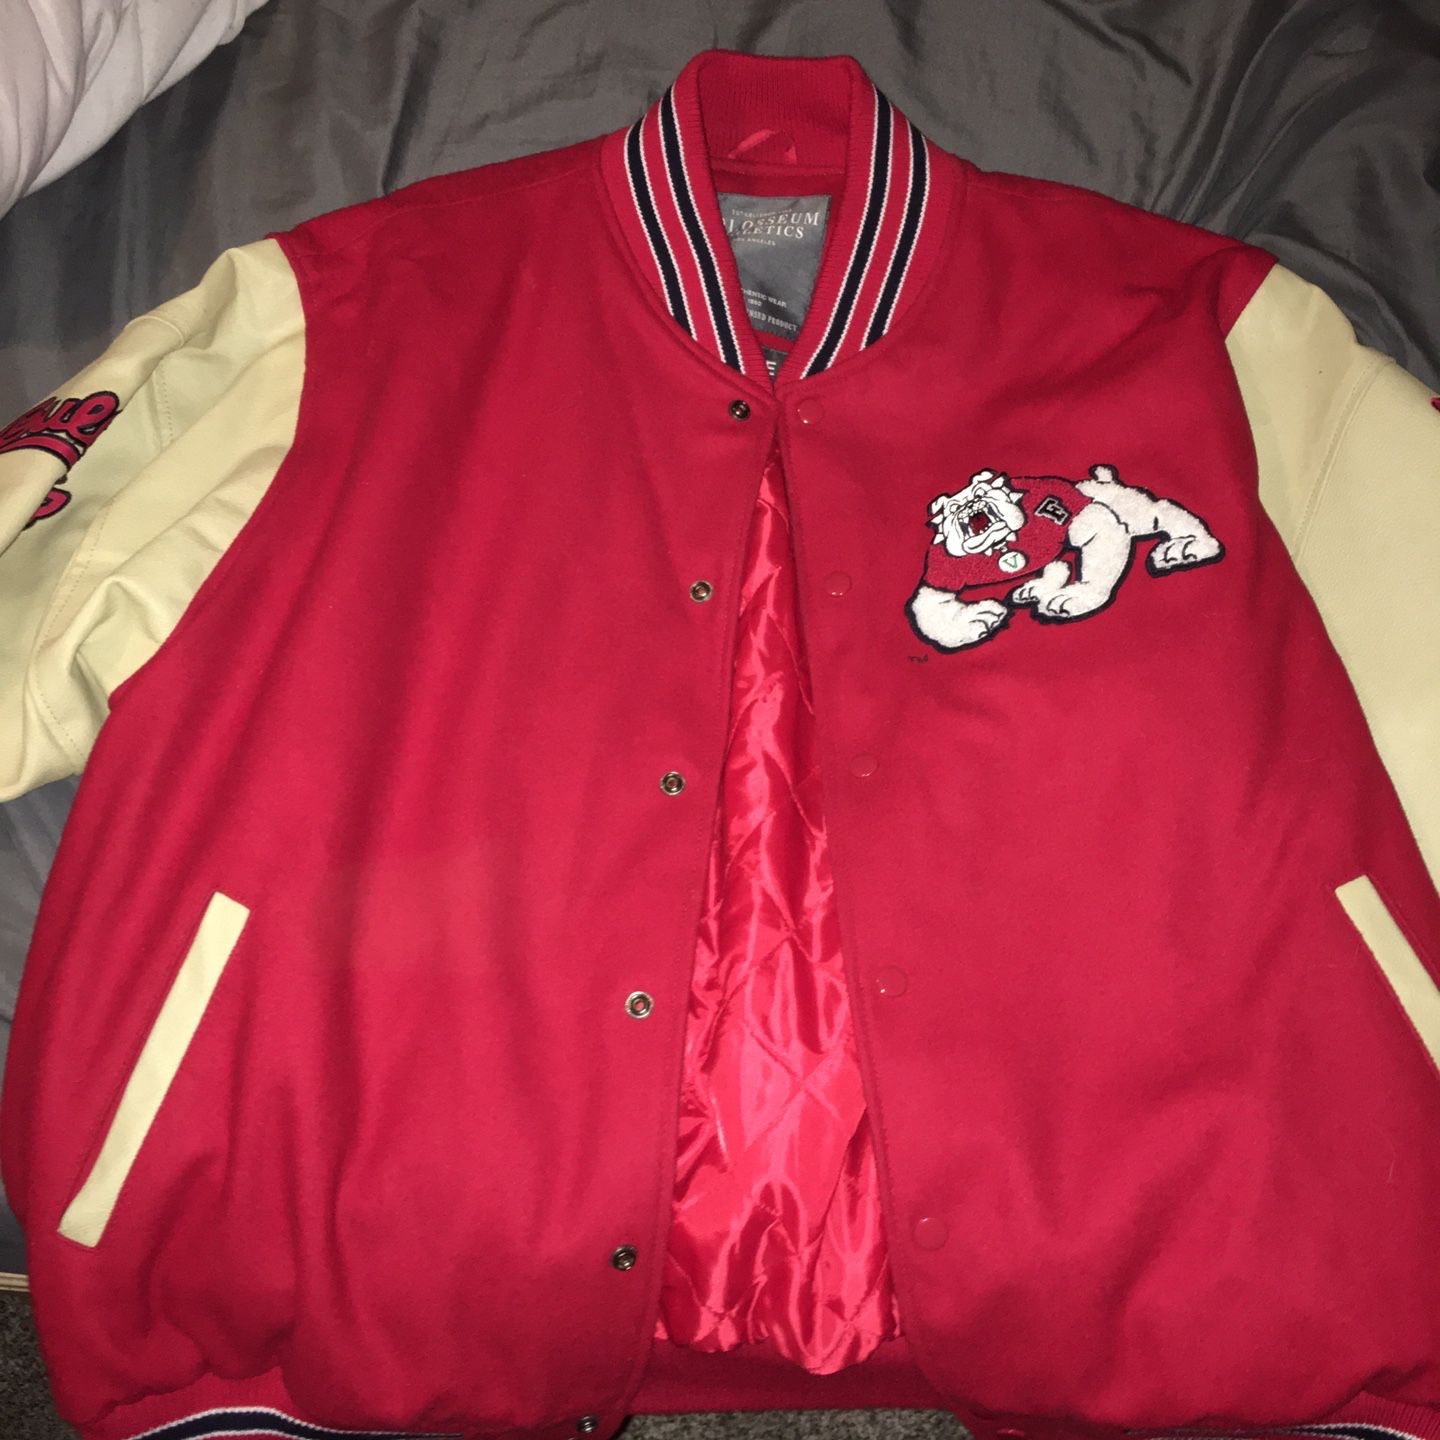 LV X NBA PLAYER LEATHER MIX JACKET SIZE XL for Sale in Lacey, WA - OfferUp